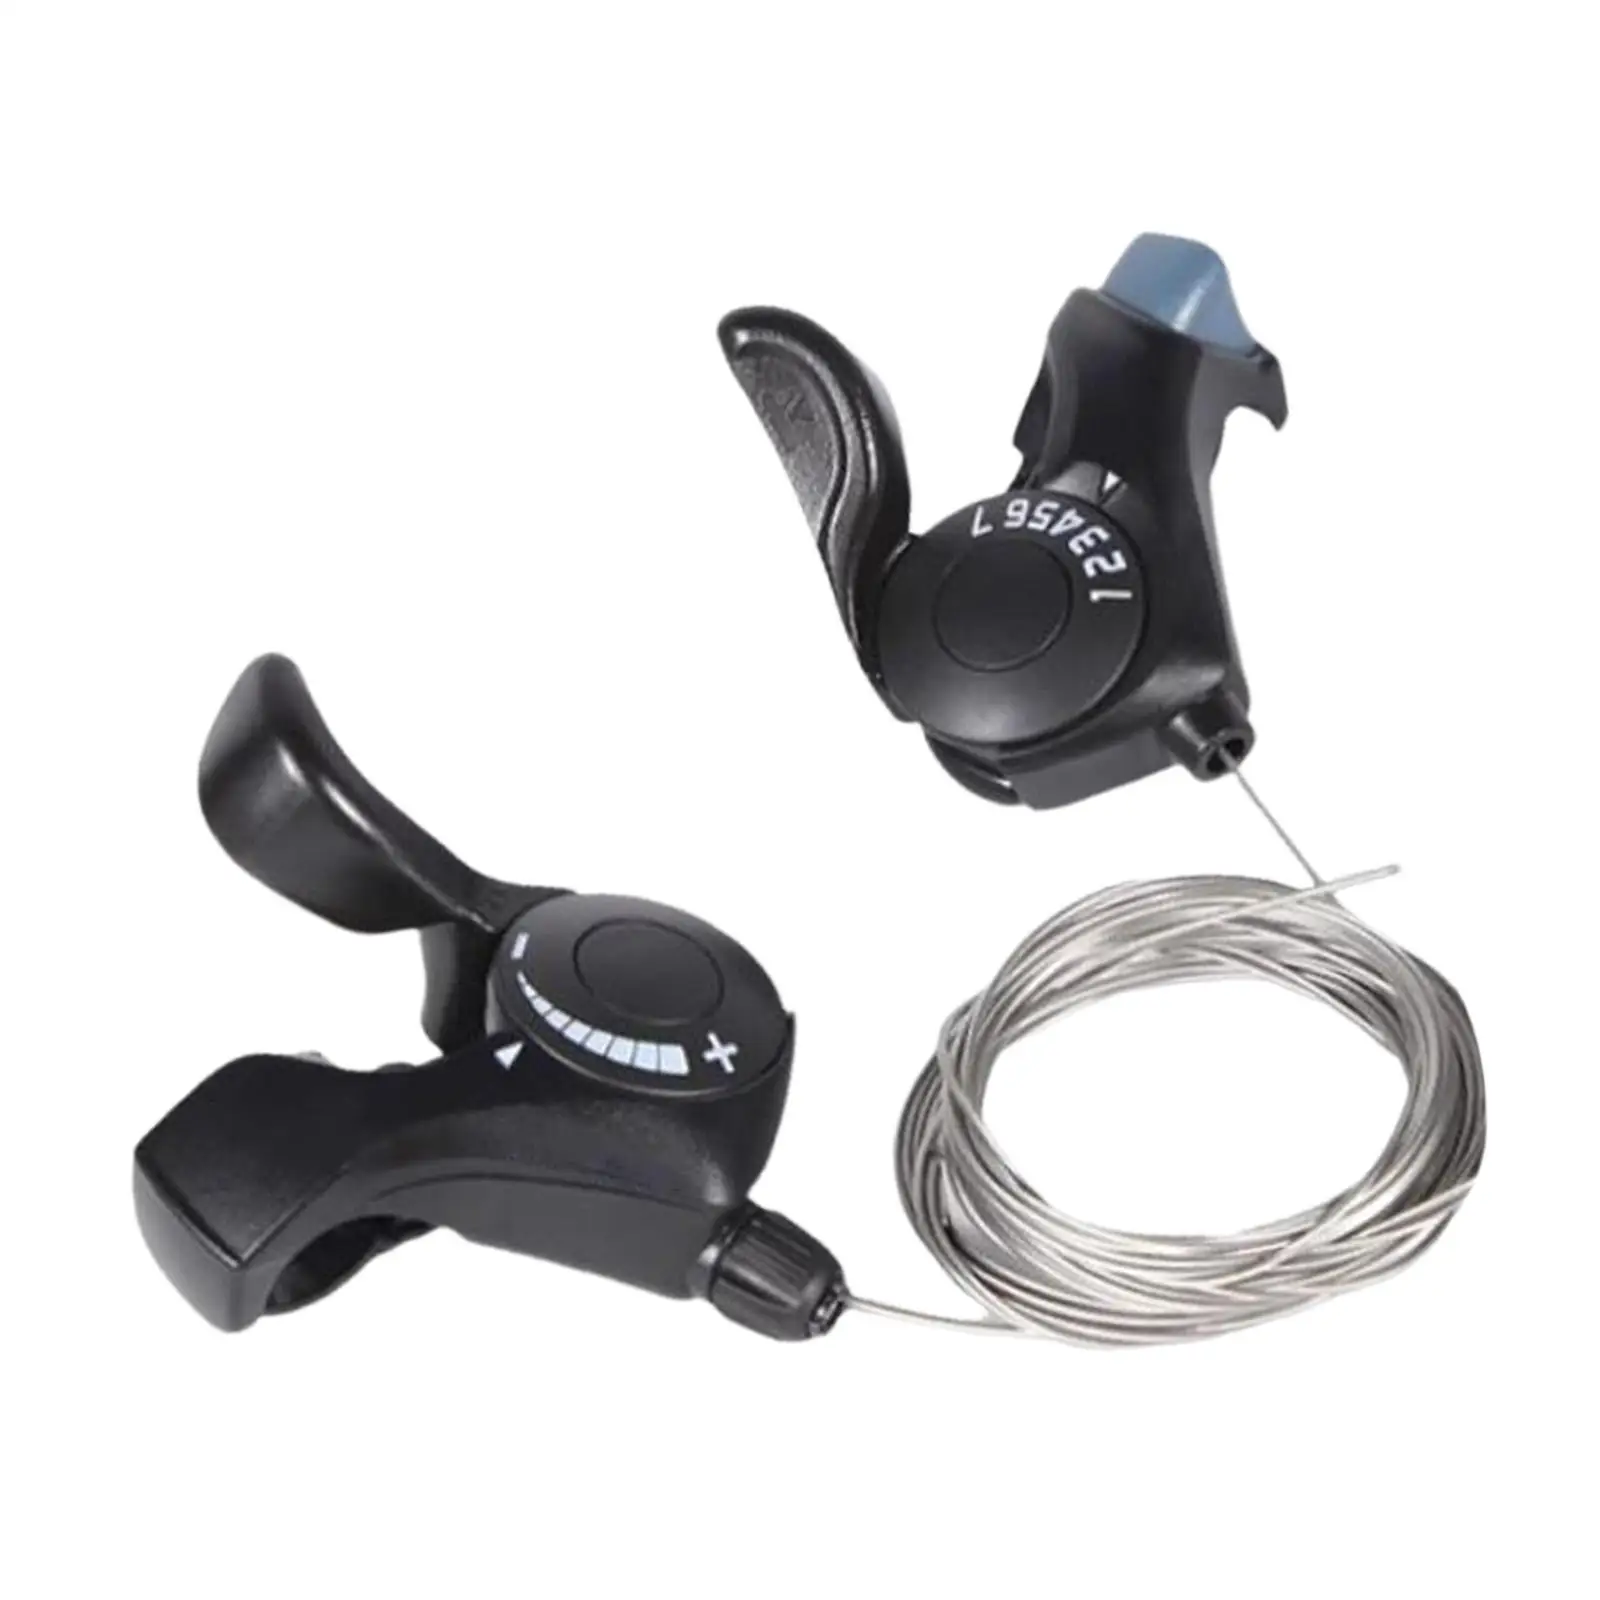 Bike Shifters Set Bicycle Left Right Lever Shifter Bike Thumb Gear Shifter for Bicycle Road Bike Outdoor Folding Bike Supplies